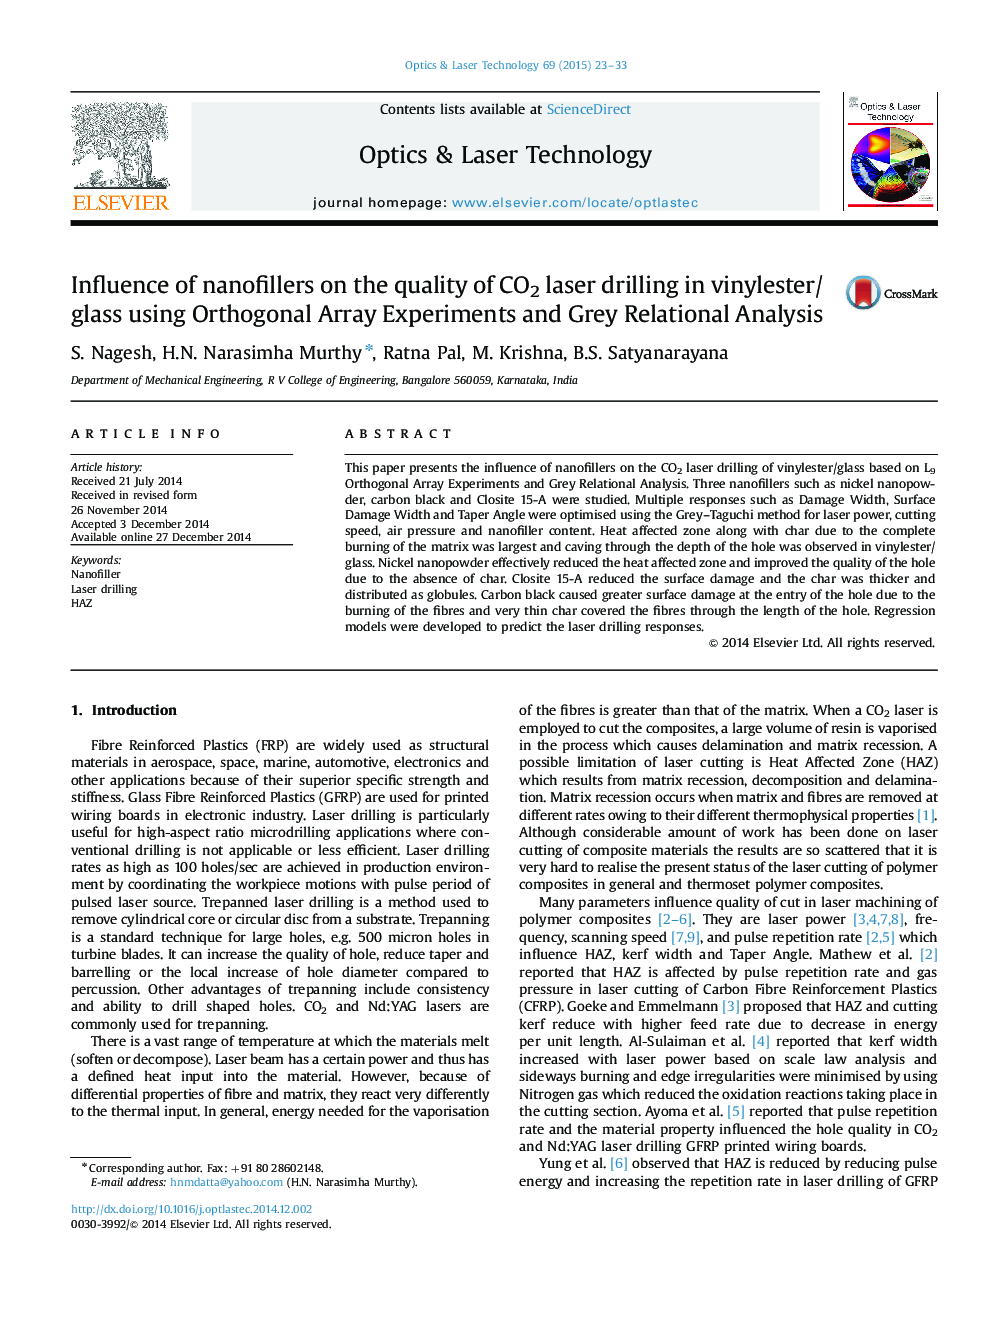 Influence of nanofillers on the quality of CO2 laser drilling in vinylester/glass using Orthogonal Array Experiments and Grey Relational Analysis